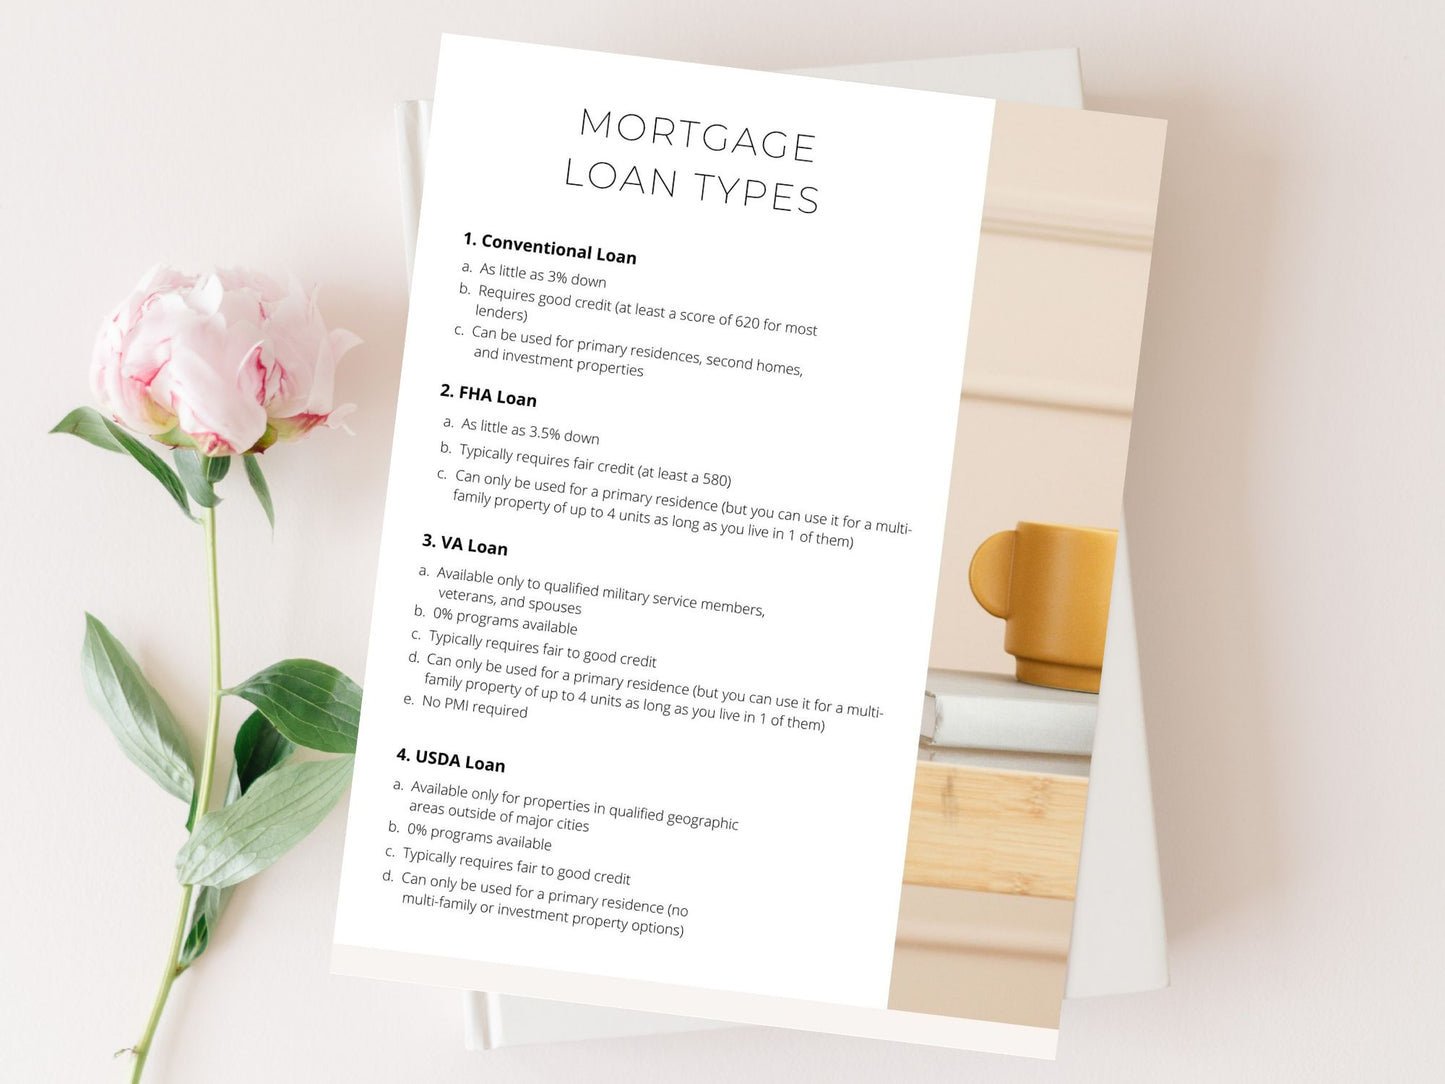 Real Estate Minimal Mortgage Loan Types - Concise template for streamlined understanding of various mortgage options.